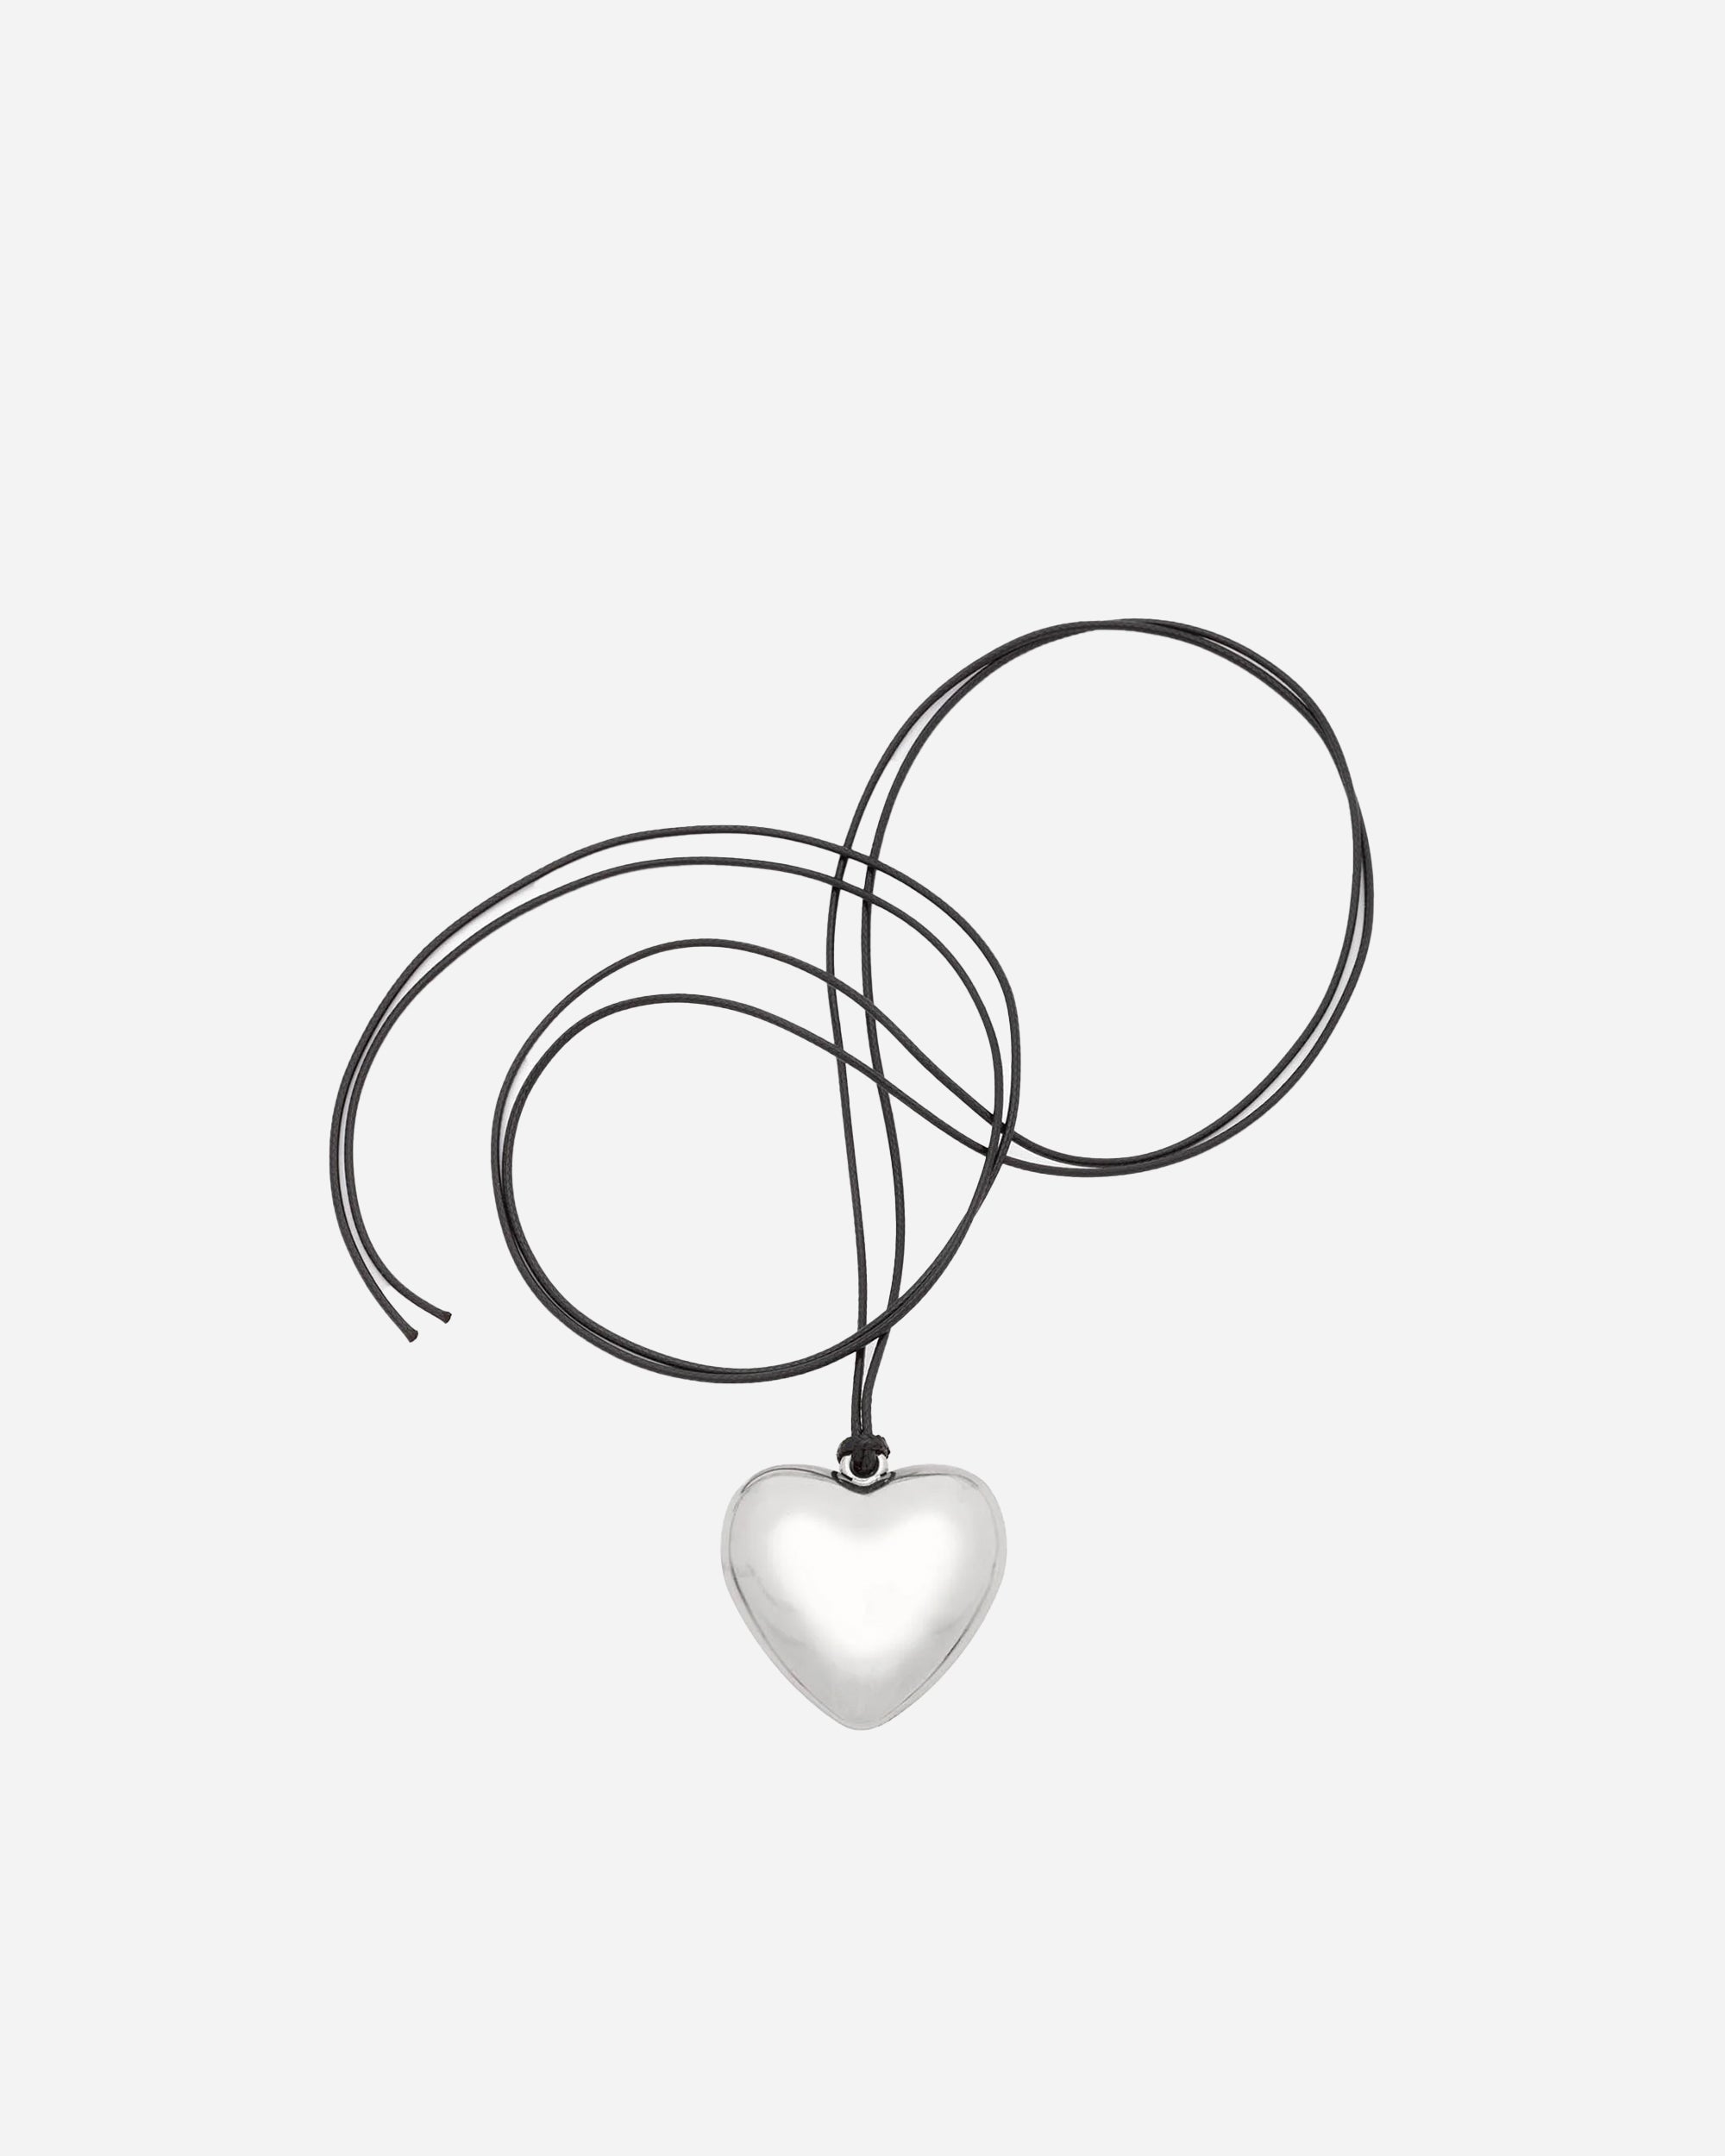 The Good Statement Spirit Necklace Small Heart SILVER TGS-S-3